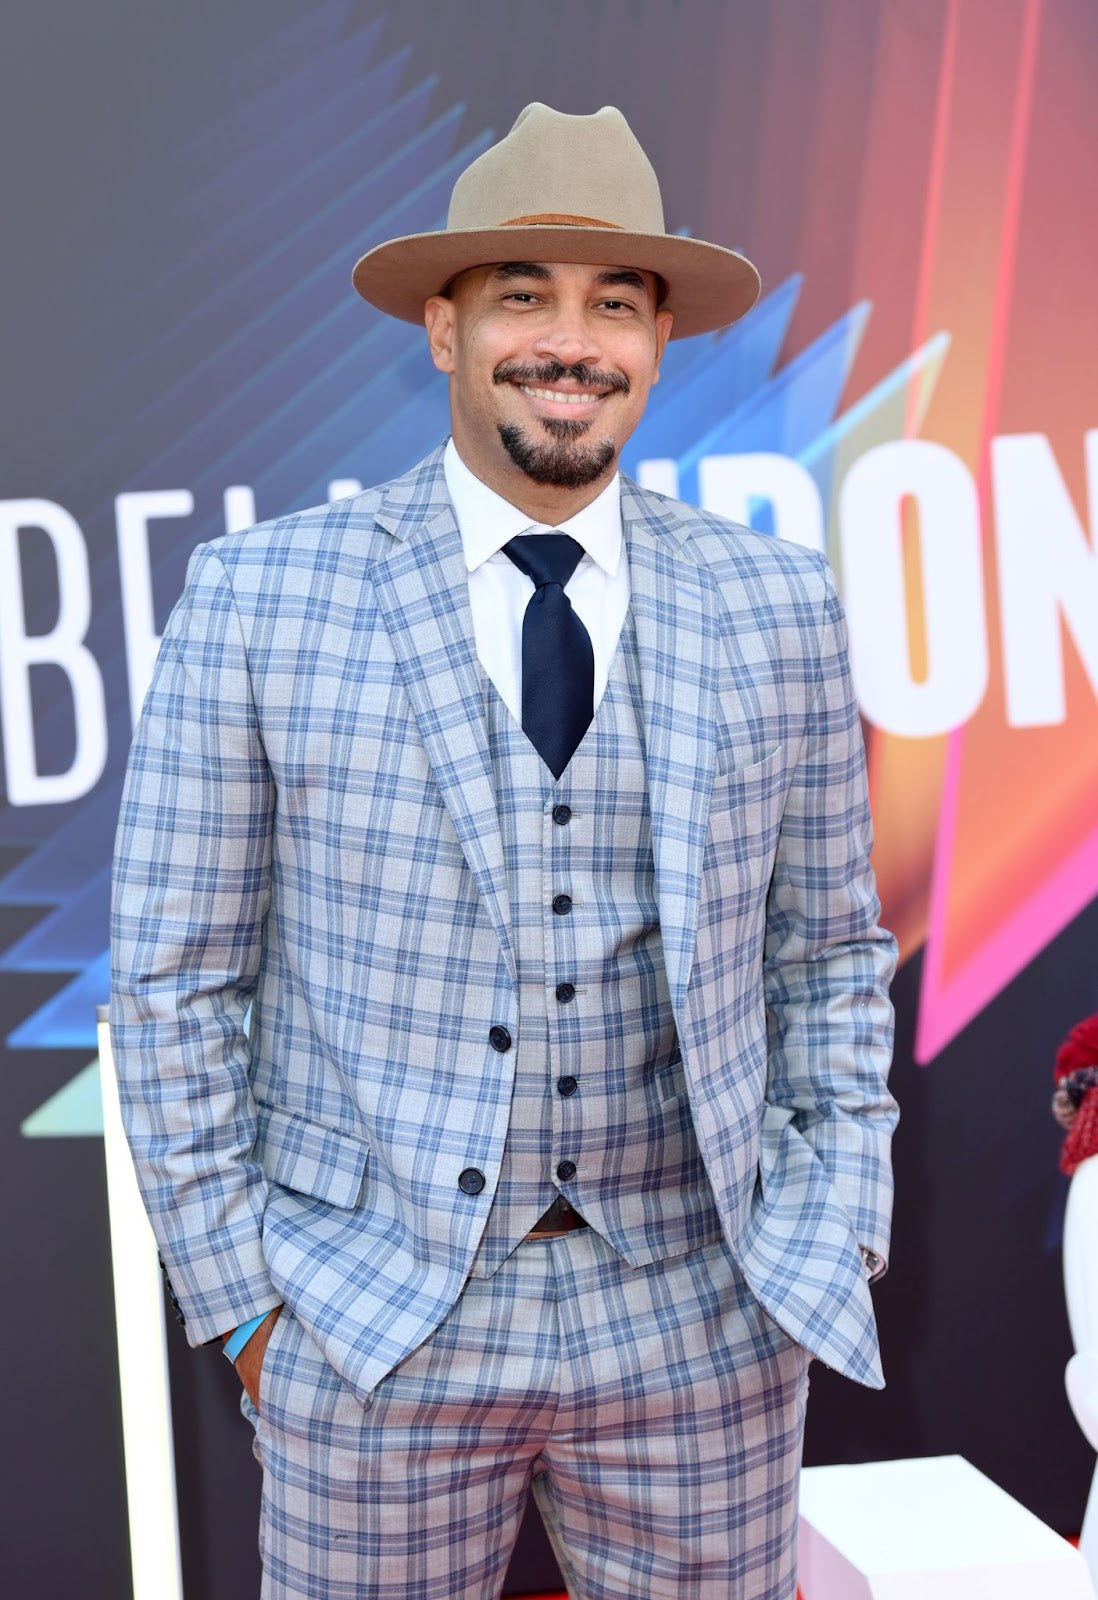 Octavio E Rodriguez wore a flat brim, tan fedora with a plaid three-piece suit at the 65th BFI London Film Festival (Karwai Tang/WireImage).